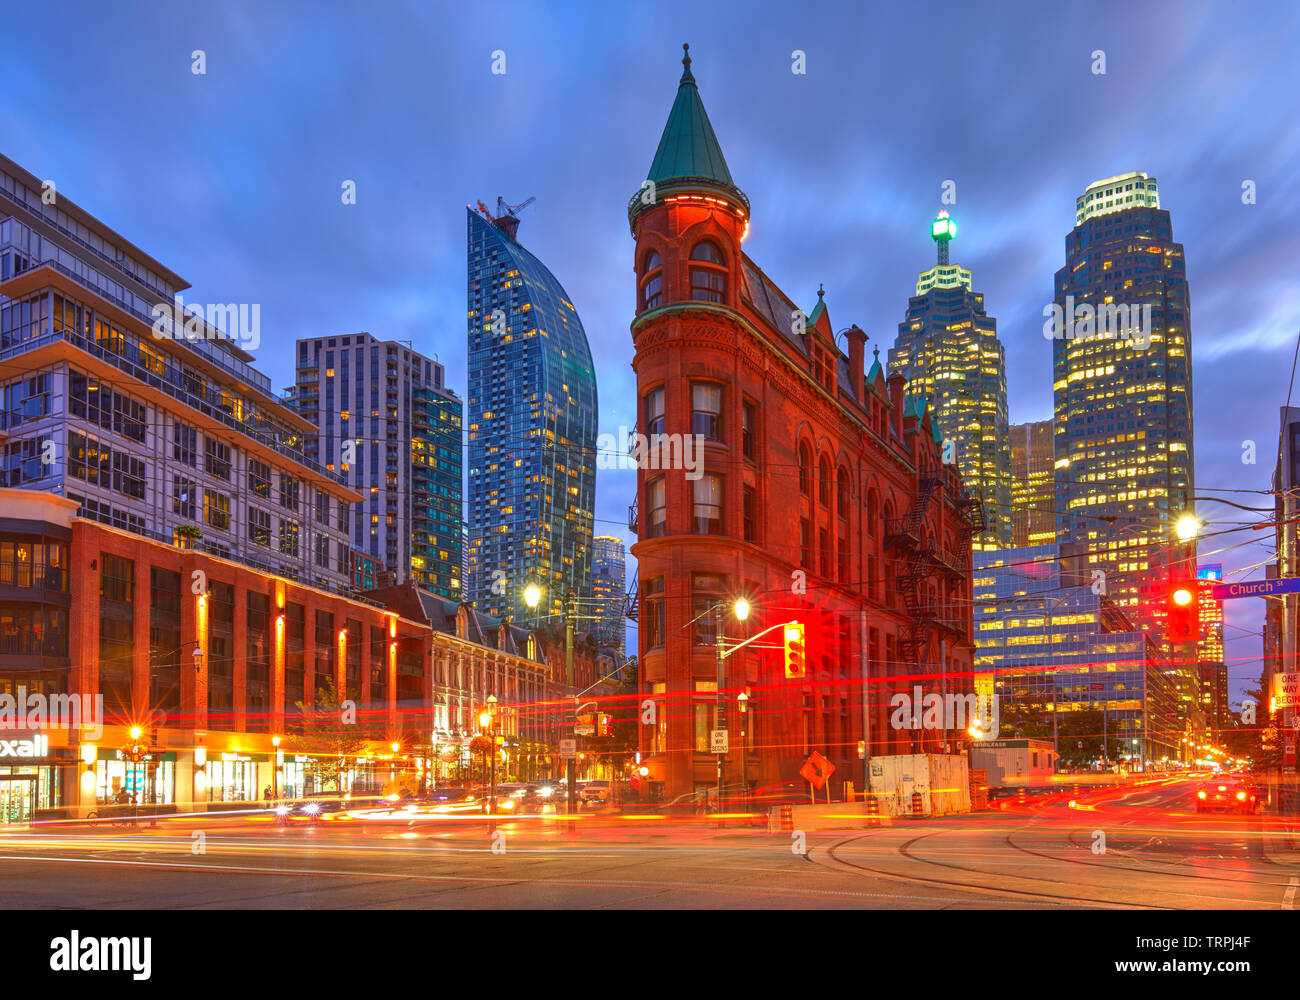 Gooderham Building, also known as the Flatiron Building, during the blue hour with light trails, Toronto, Canada Stock Photo